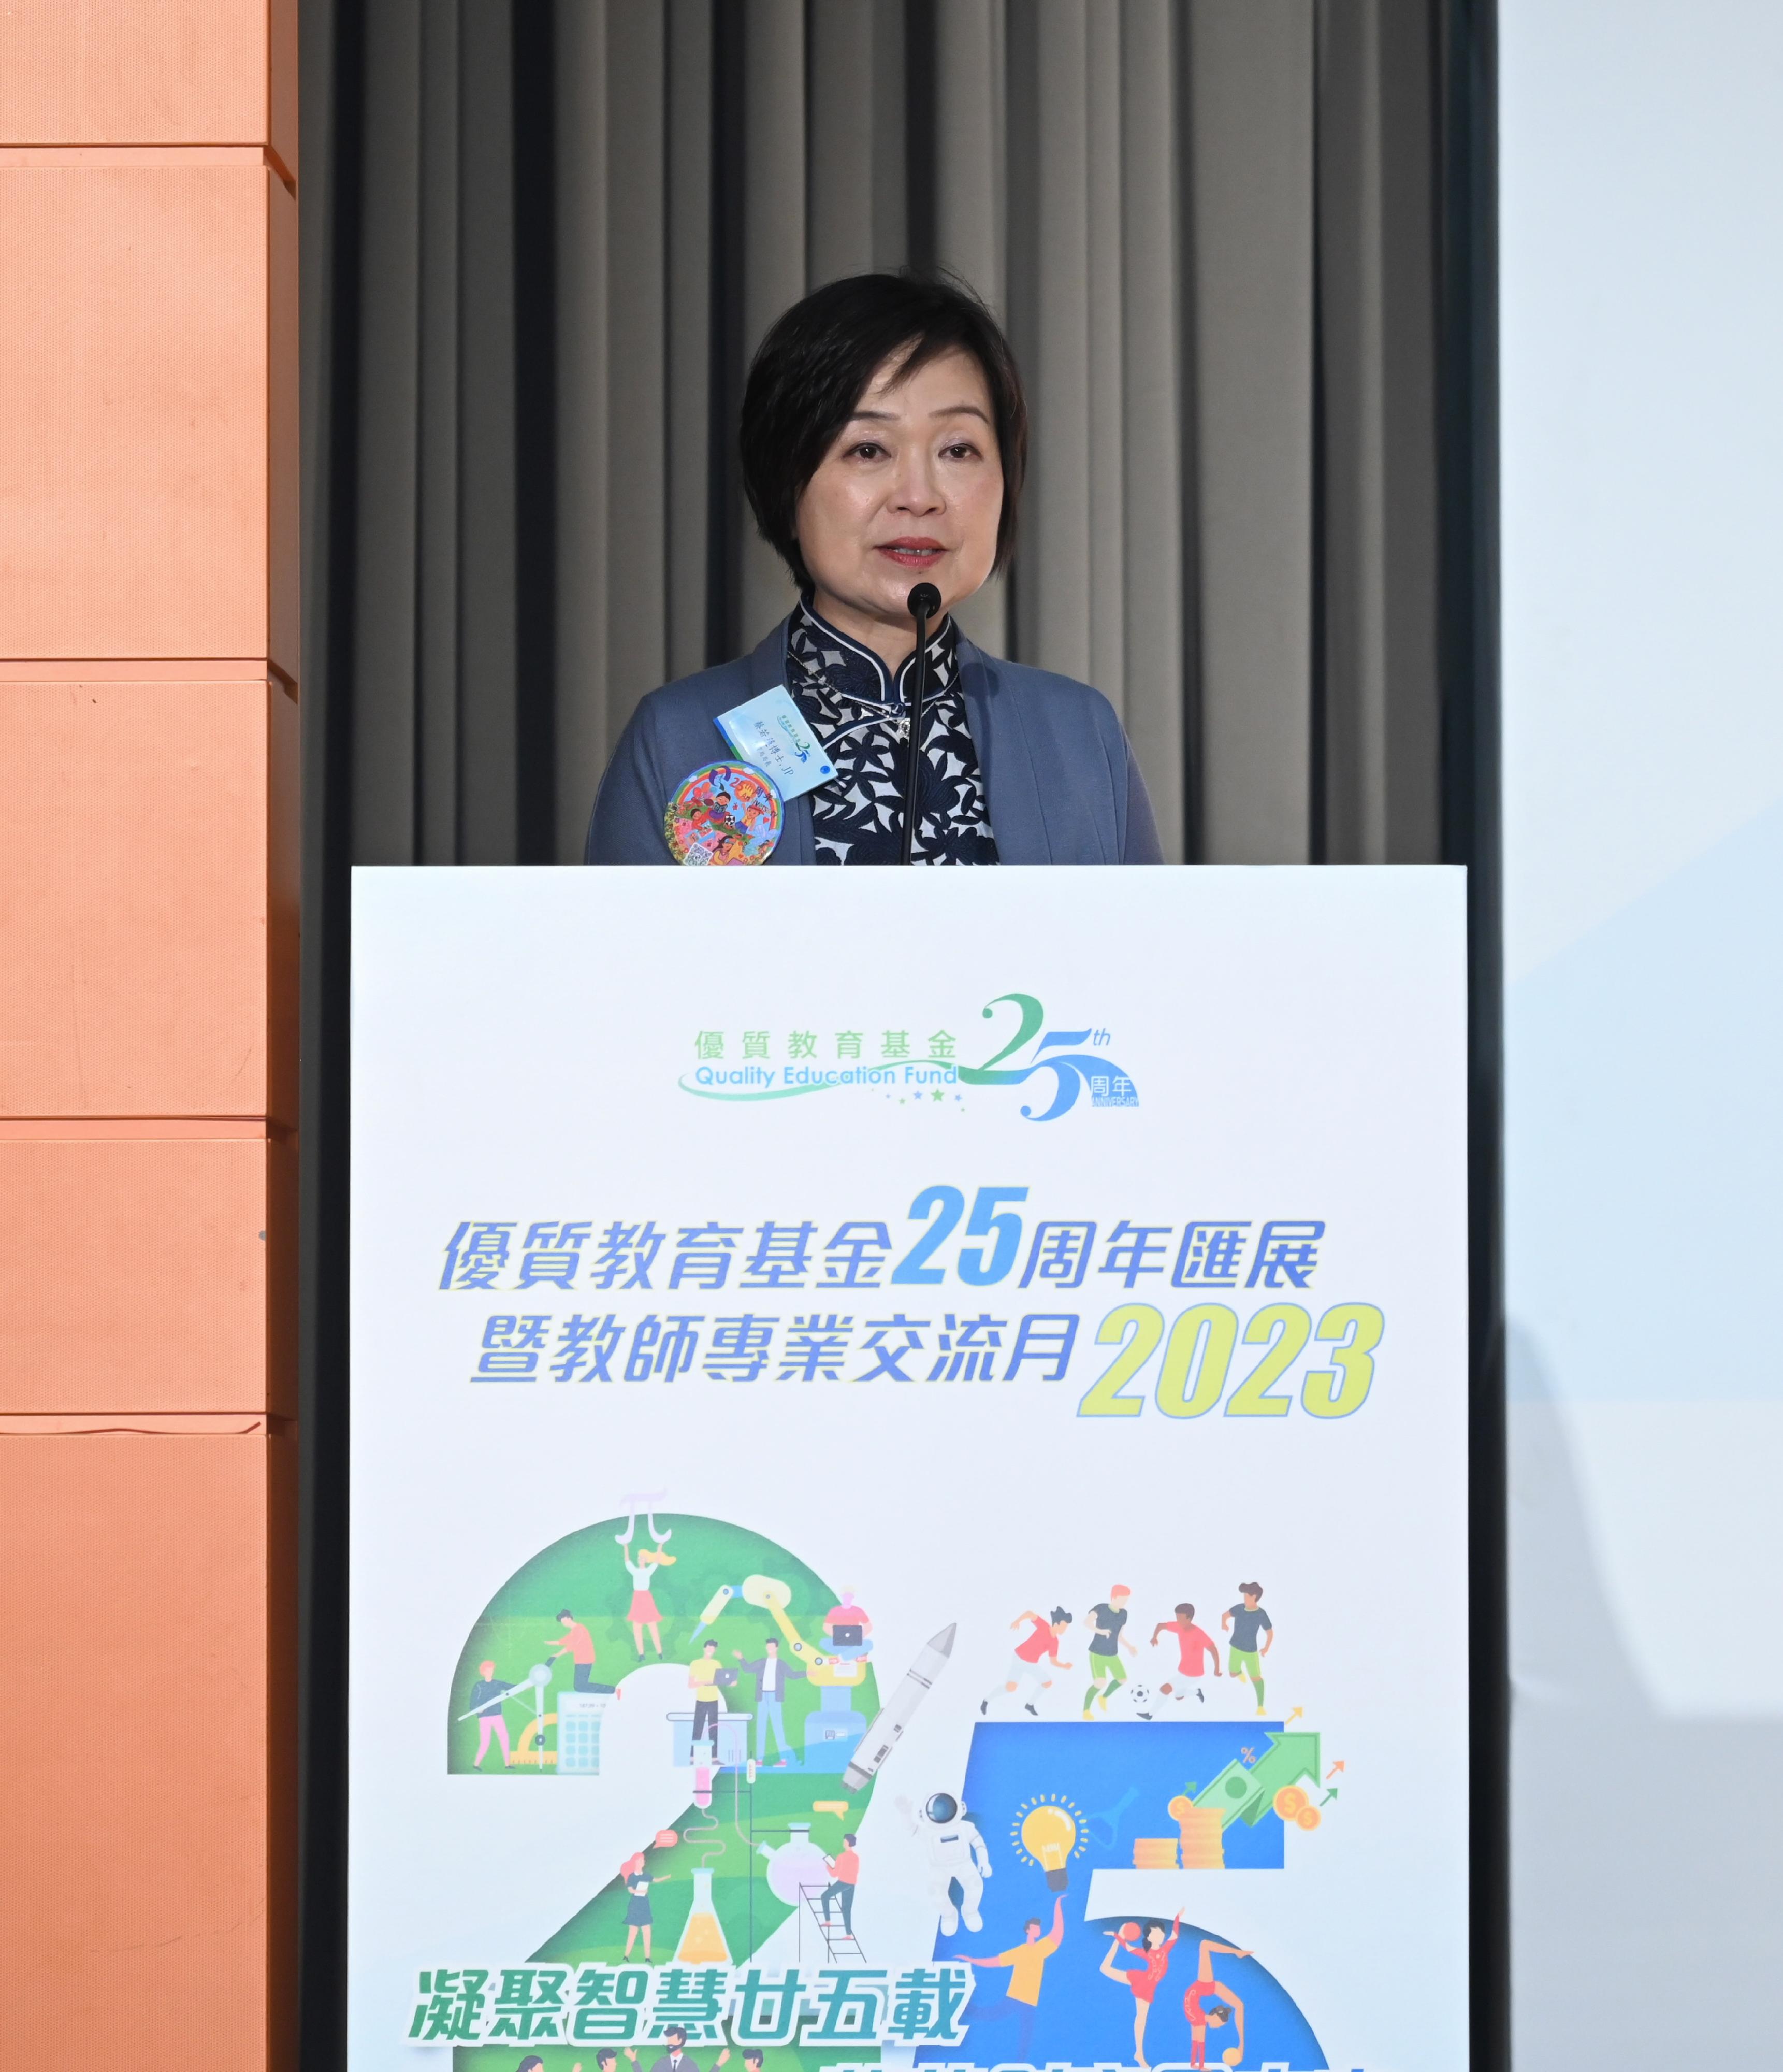 The Quality Education Fund (QEF) held the Opening cum Prize Presentation Ceremony of the QEF 25th Anniversary Exposition cum Teachers' Professional Experience Sharing Month 2023 today (March 25). Photos shows the Secretary for Education, Dr Choi Yuk-lin, delivering a speech at the ceremony.